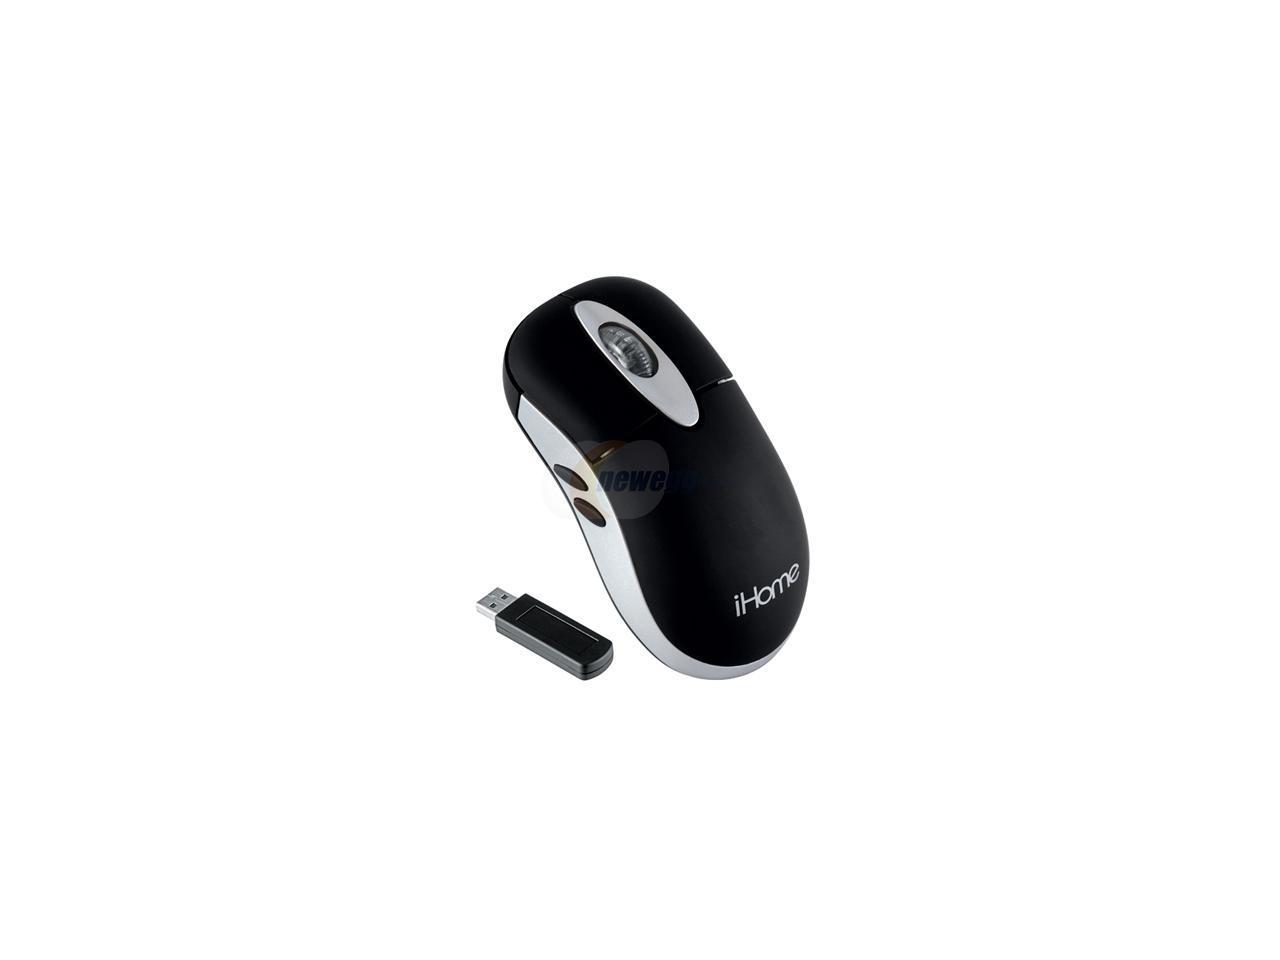 ihome mouse not working on pc